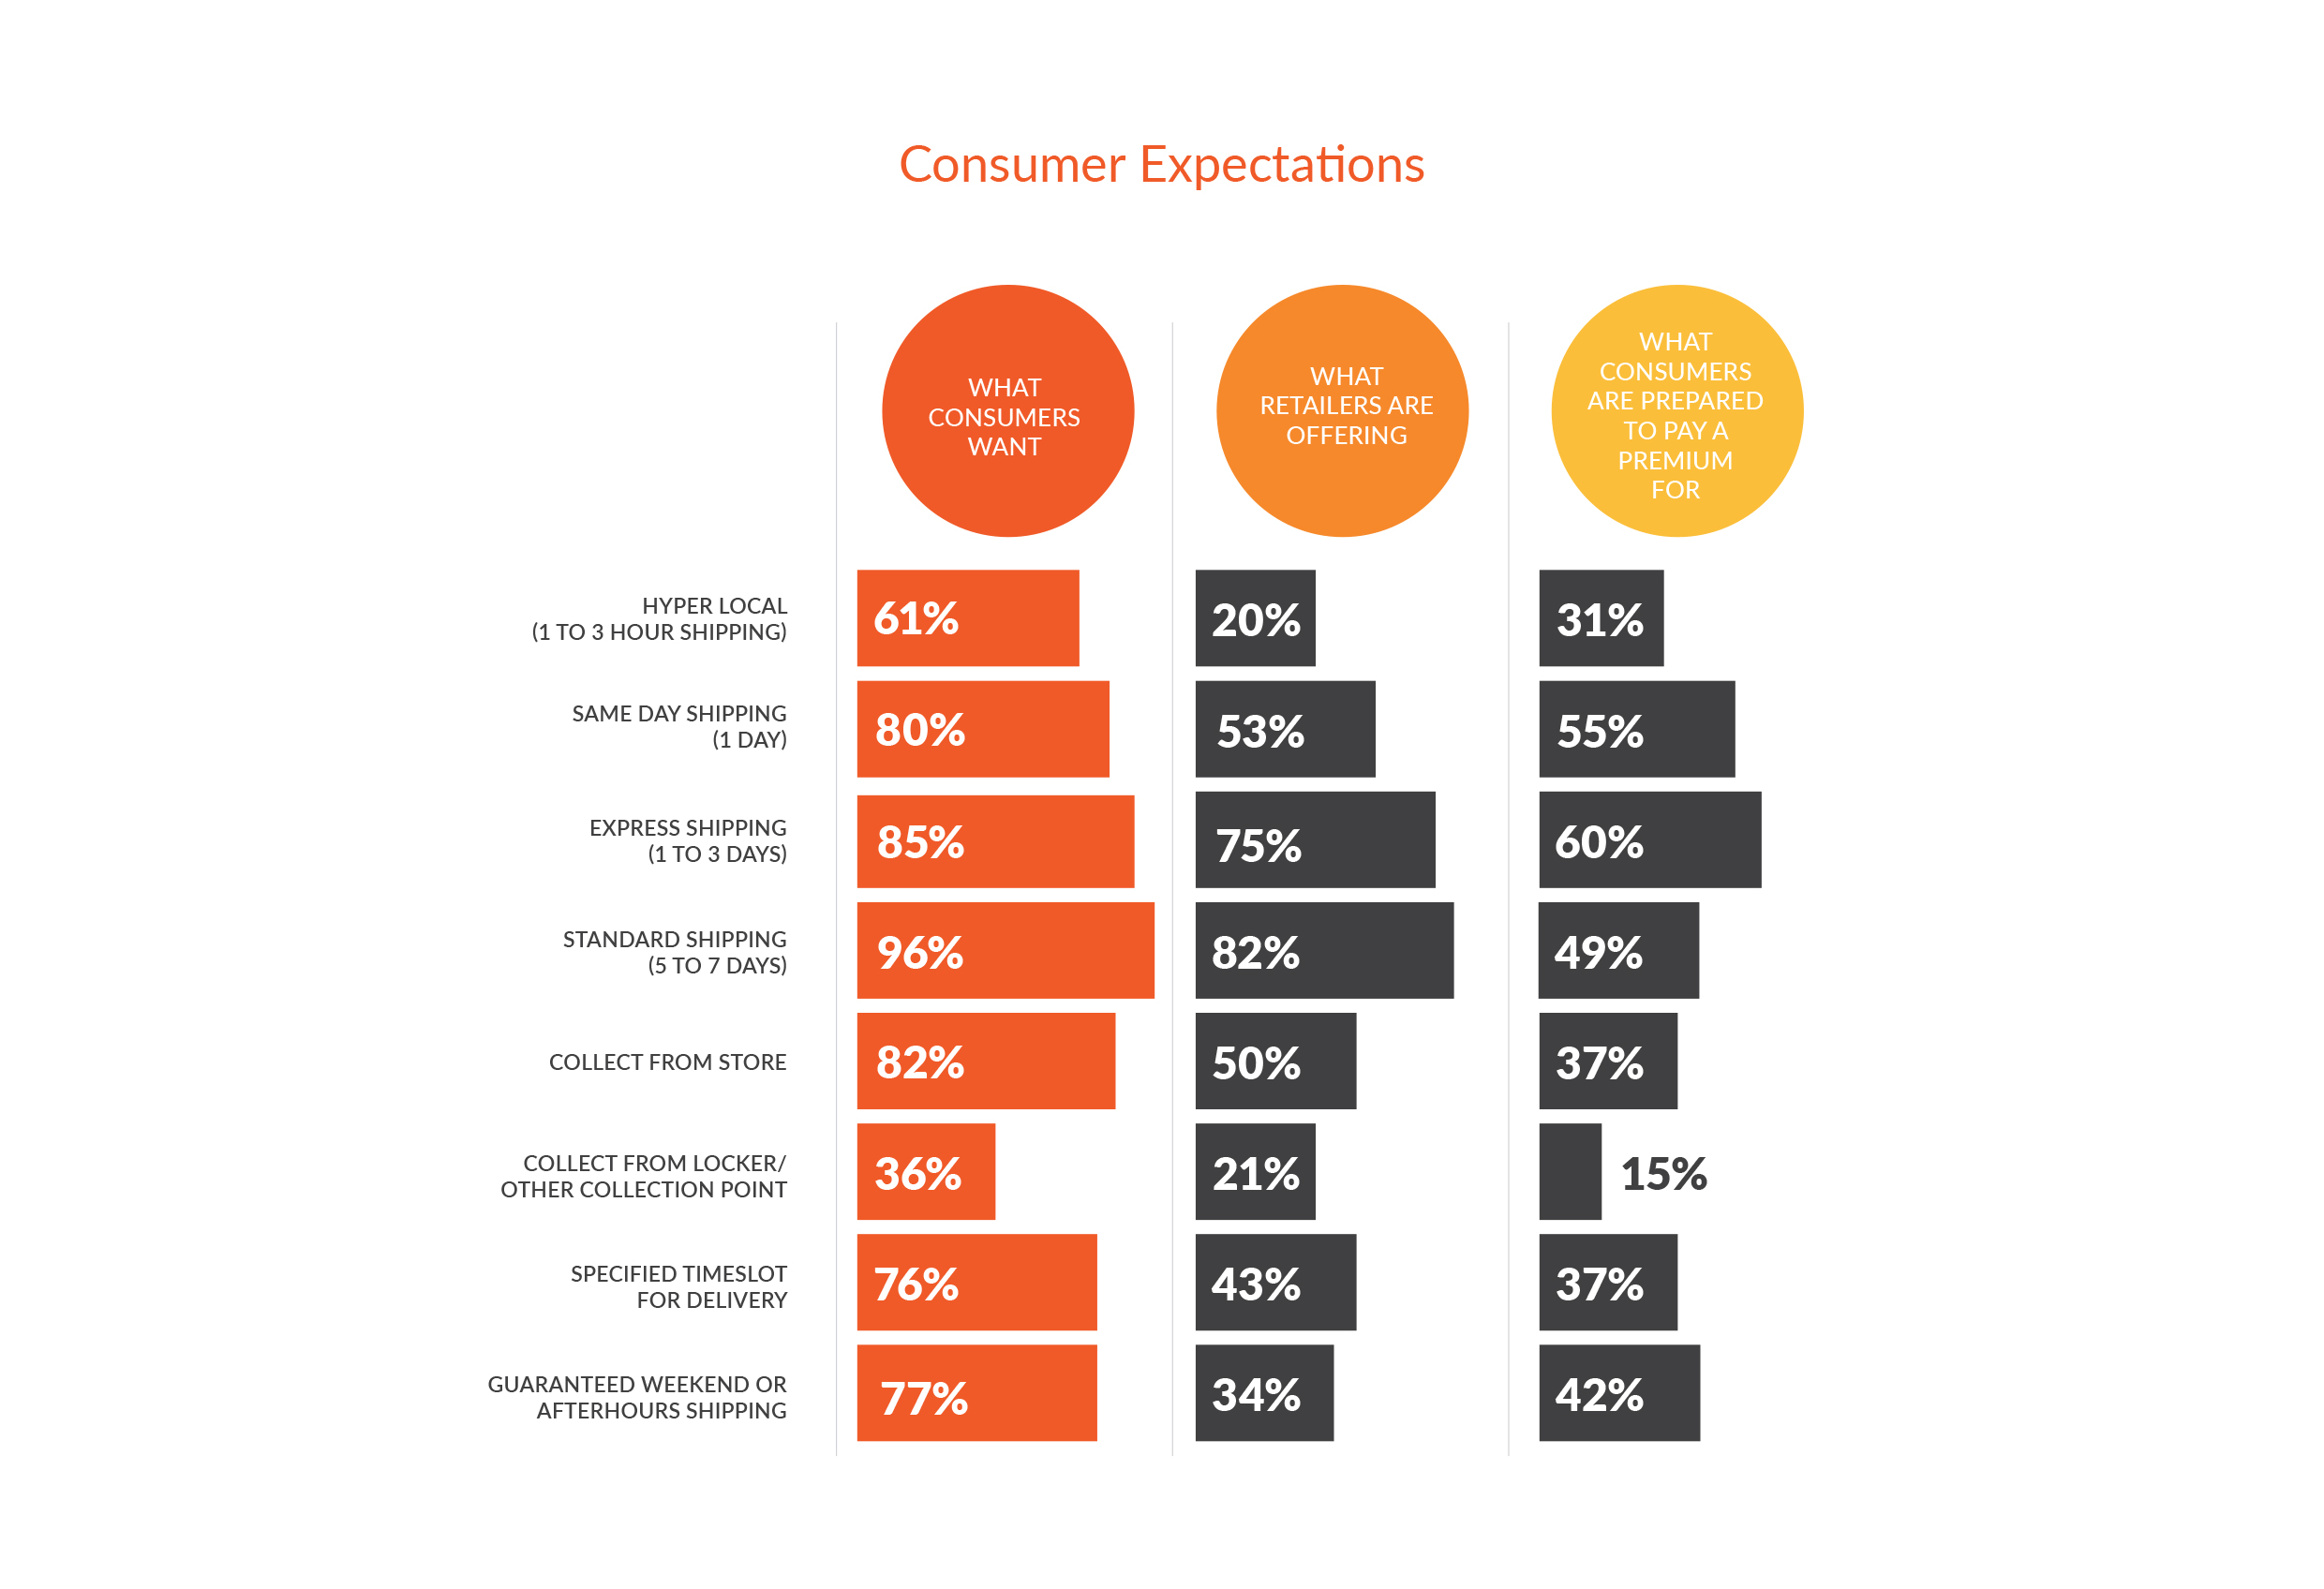 Consumers' expectations for different shipping options